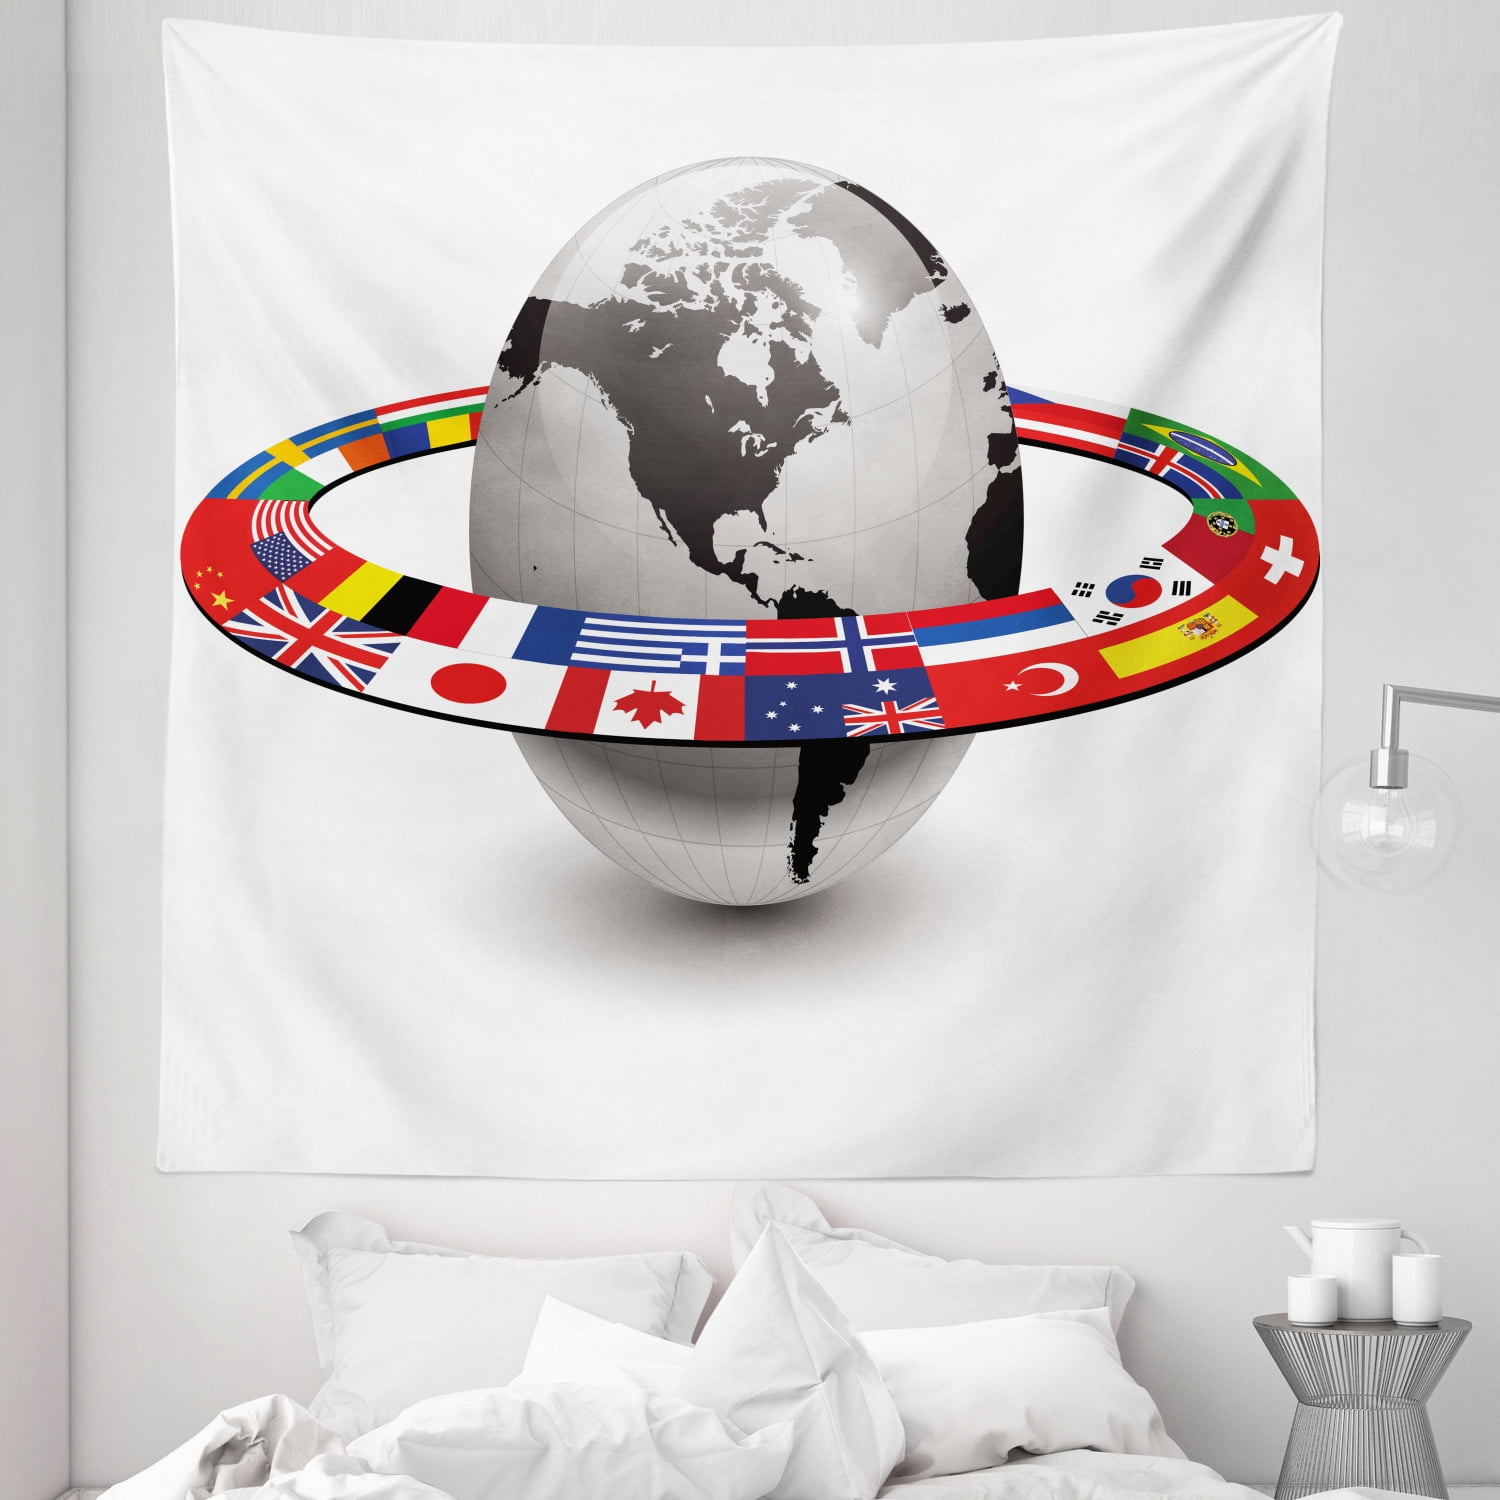 World Warm 3 Piece Bedding Set,Earth Planet with Orbit Made from National Flags International Composition Countries Decorative for Room,Twin